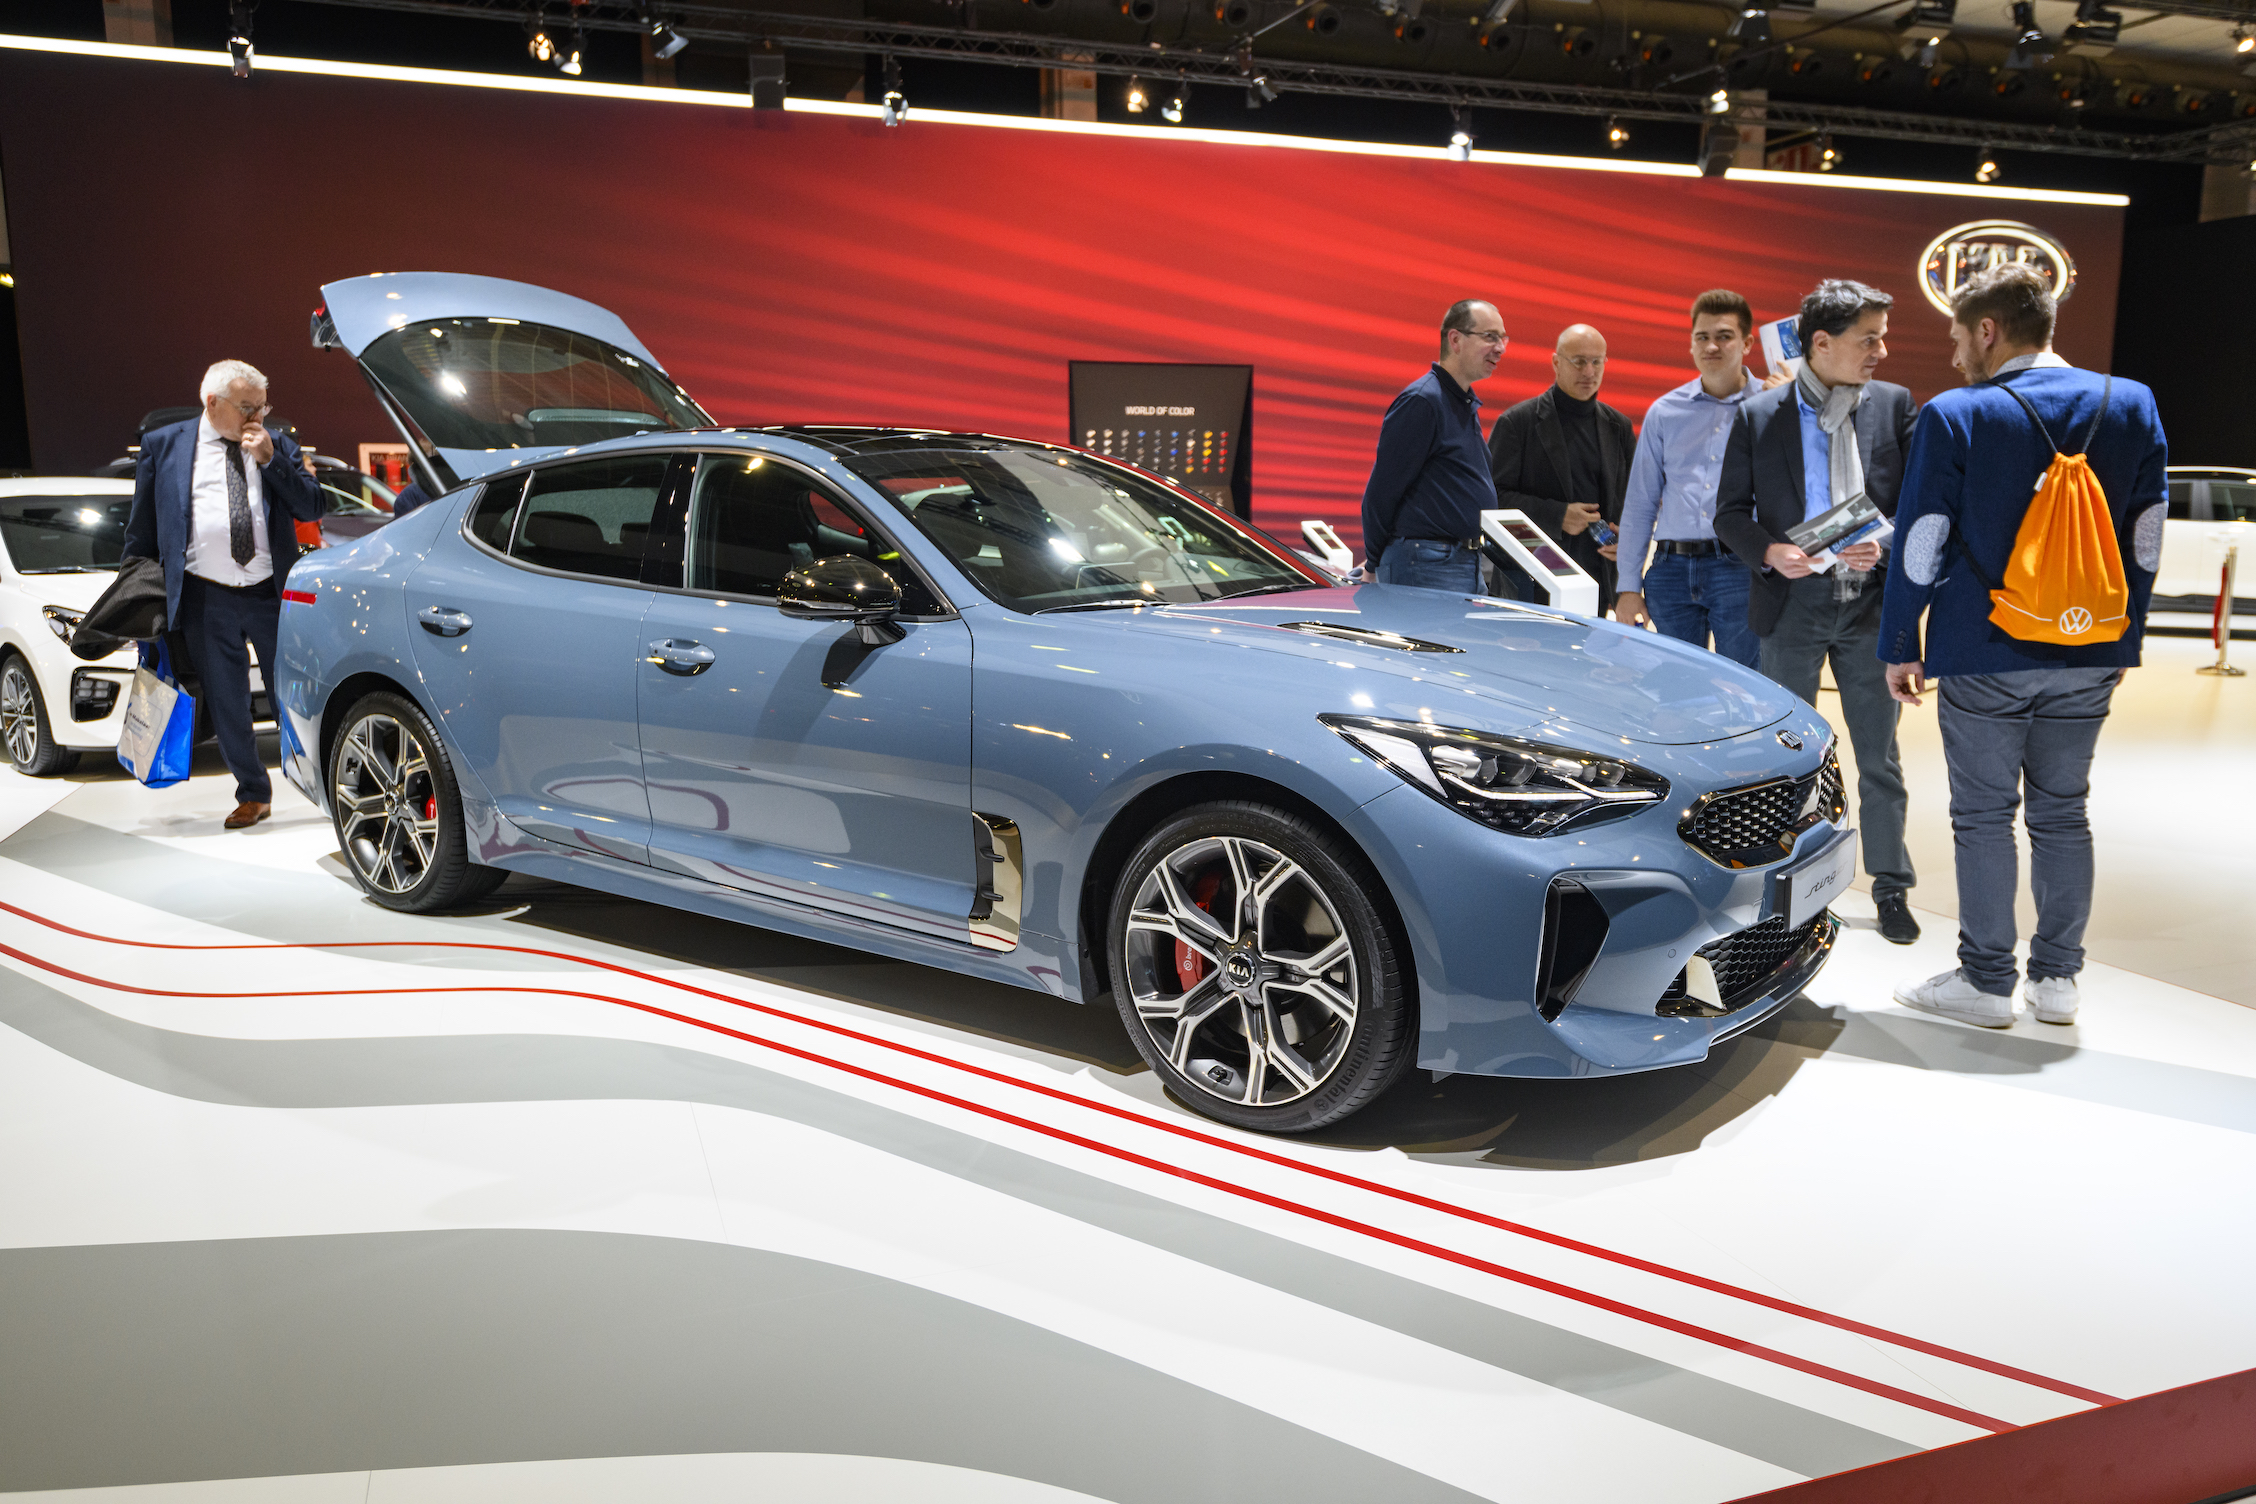 Kia Stinger compact executive 4-door fastback on display at Brussels Expo